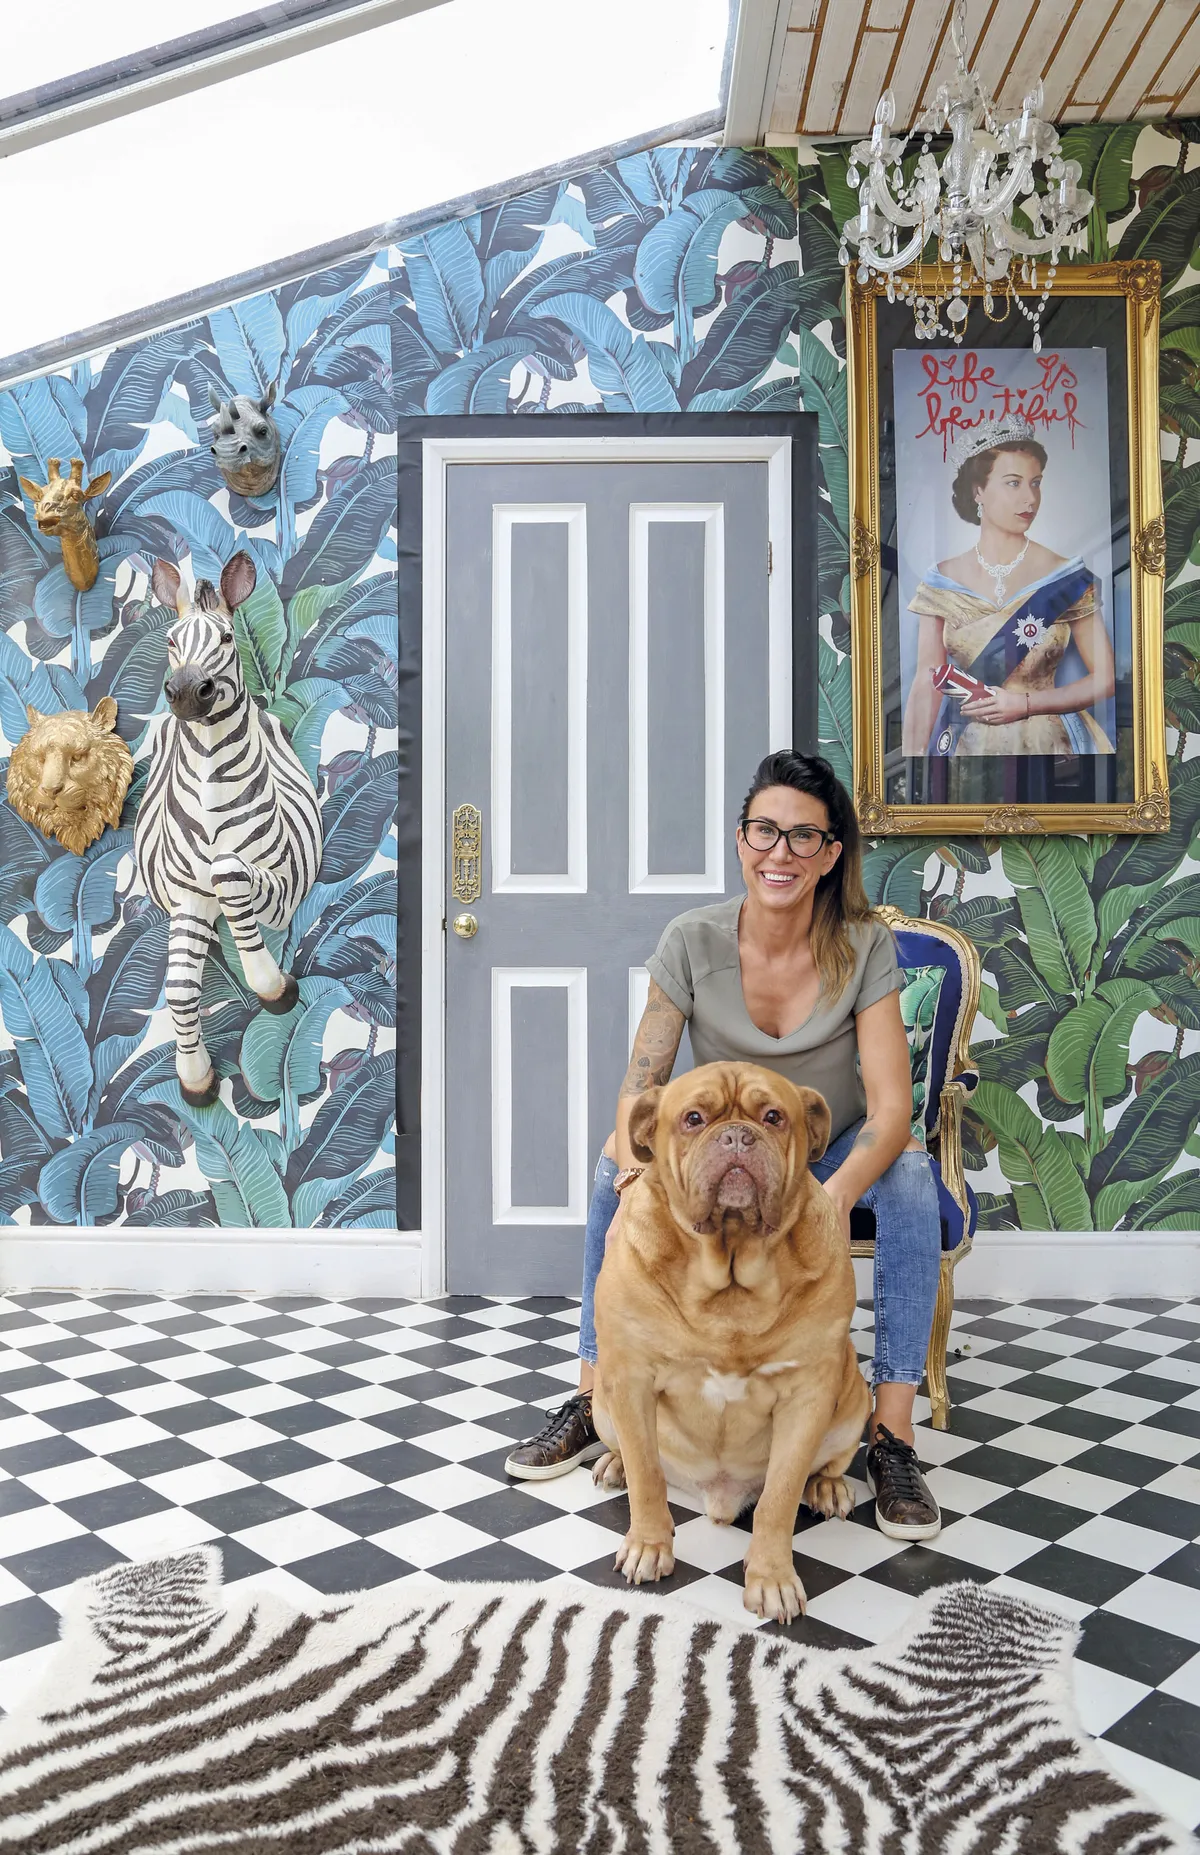 ‘The banana leaf wallpaper was bought from a seller on Etsy called Wallpapers 4 Beginners. The amazing print of the Queen is by Mr Brainwash. I framed it and gave it pride of place alongside my favourite piece: the zebra,’ Hayley says